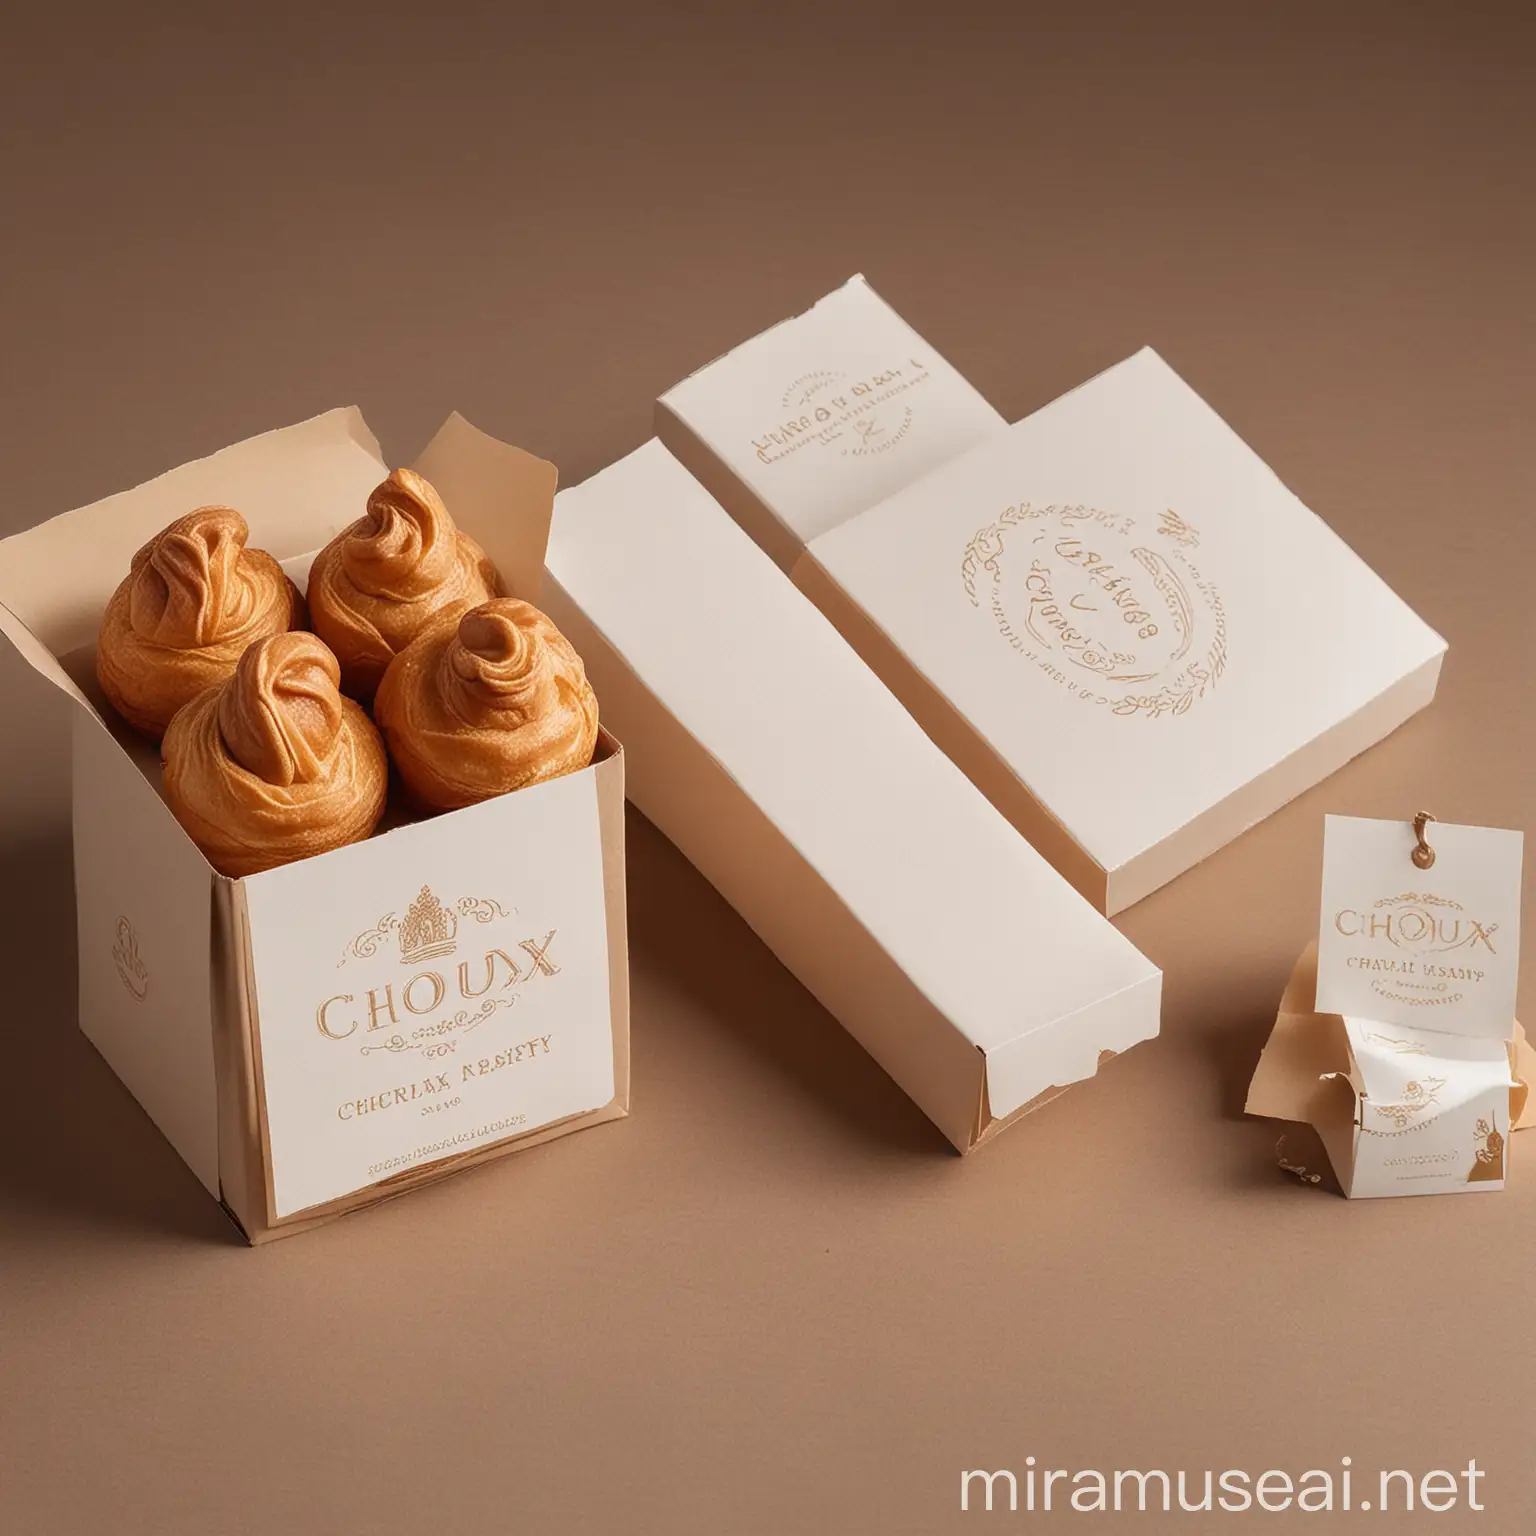 Classy and Luxurious Choux Pastry Shop Brand Identity